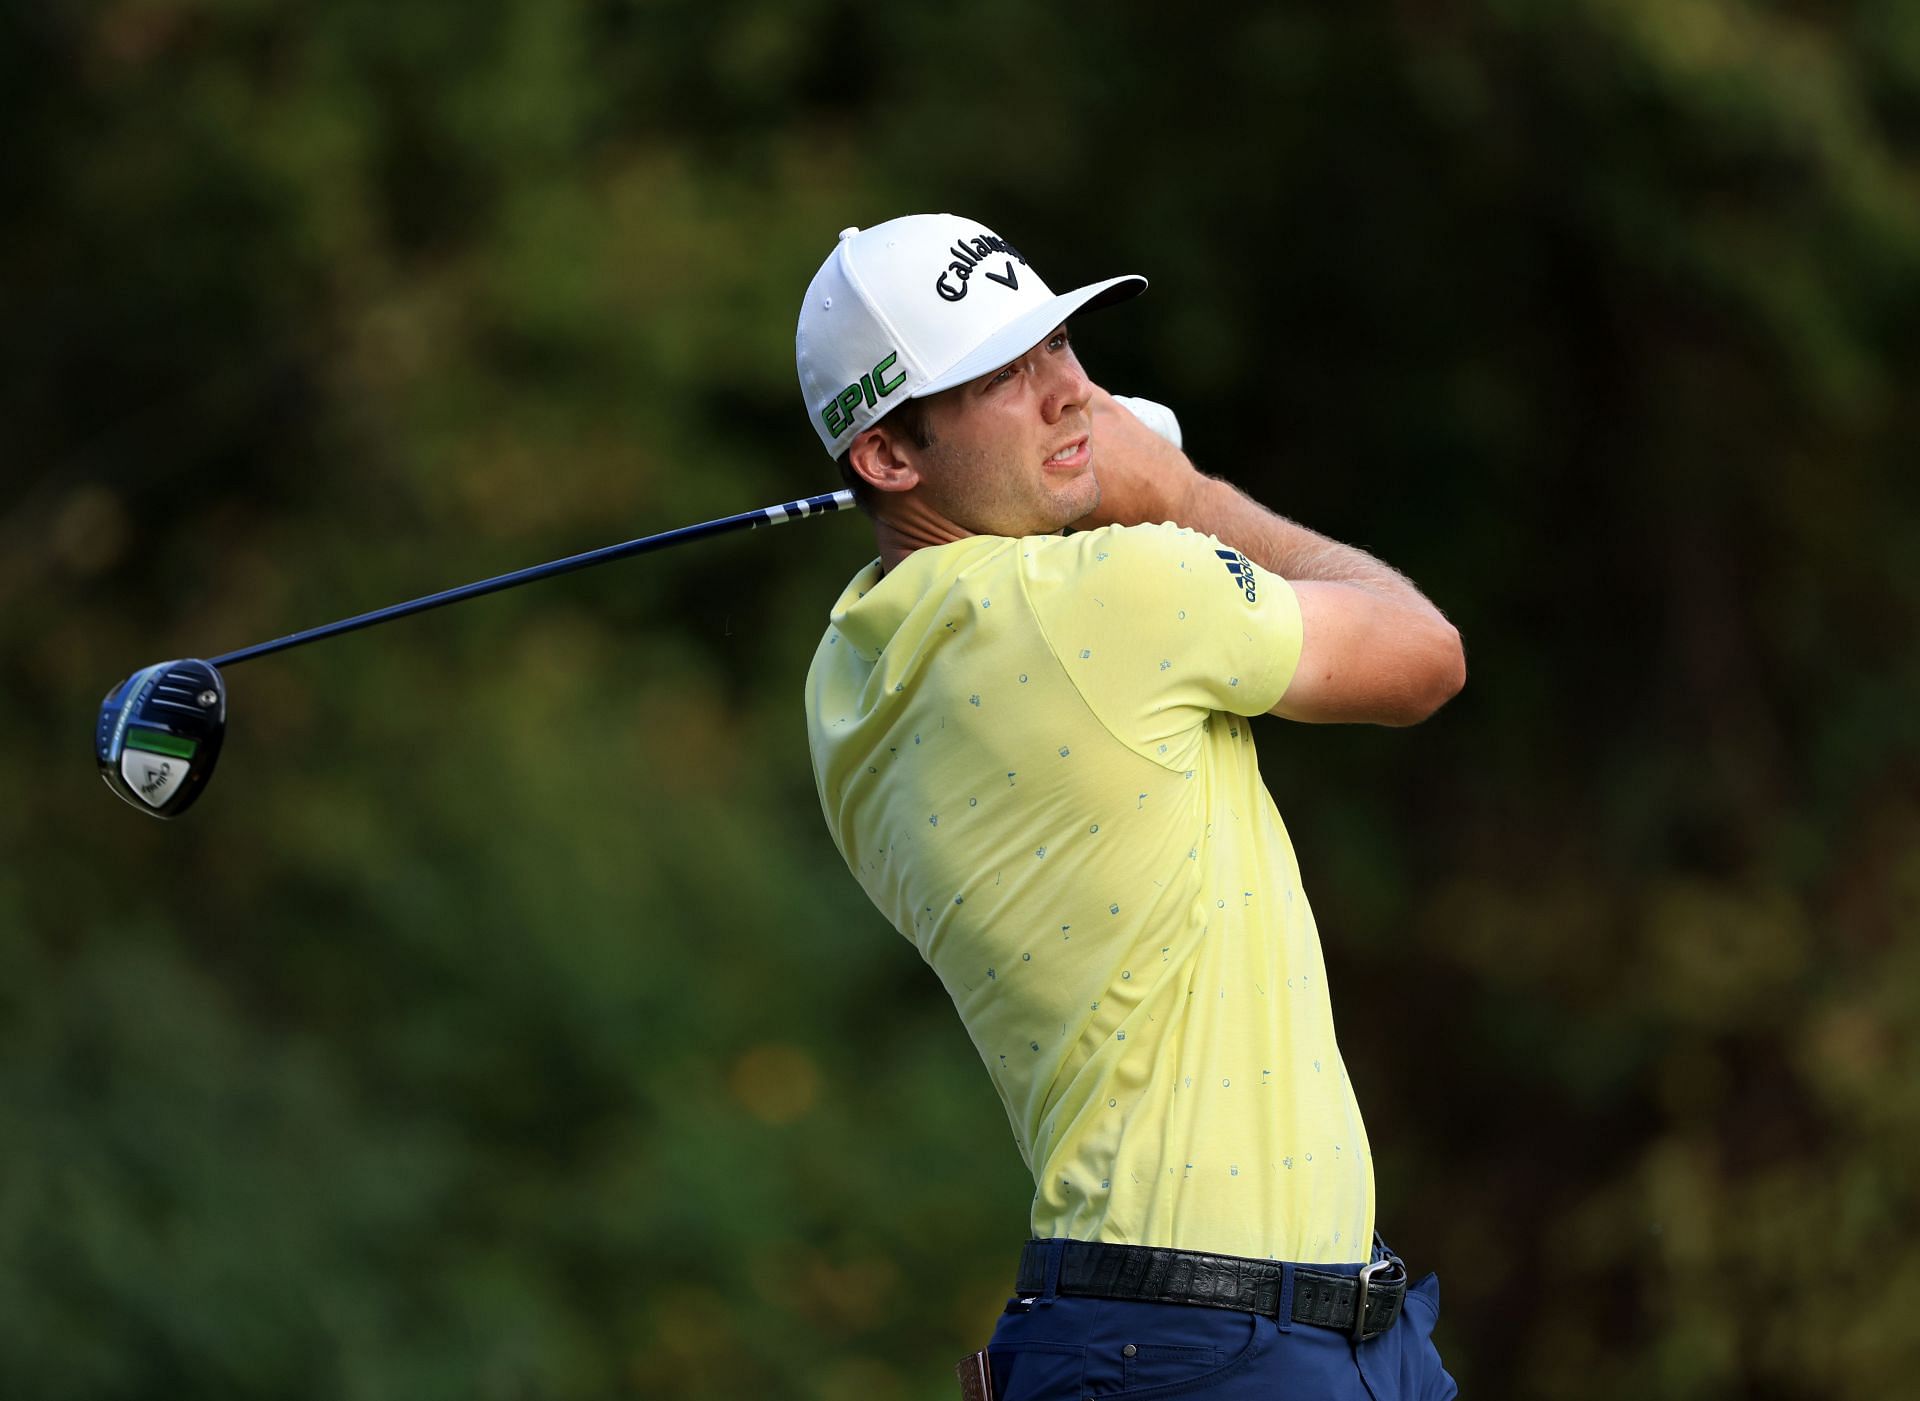 Sam Greenwood at the 2021 Sanderson Farms Championship - Final Round (Image via Sam Greenwood / Getty Images)